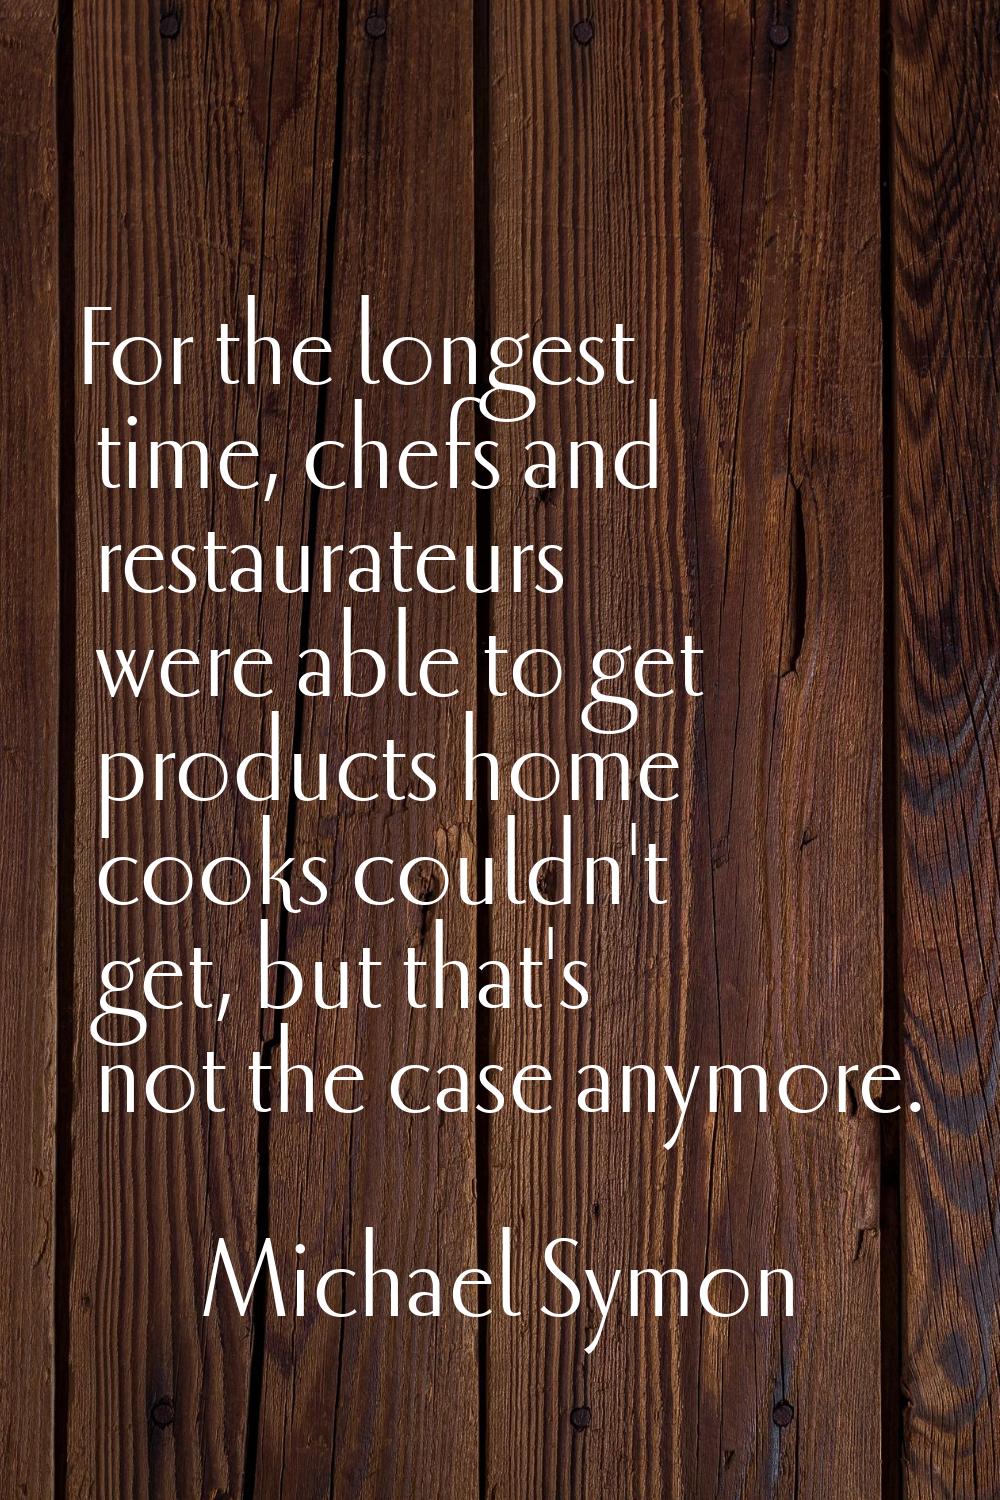 For the longest time, chefs and restaurateurs were able to get products home cooks couldn't get, bu